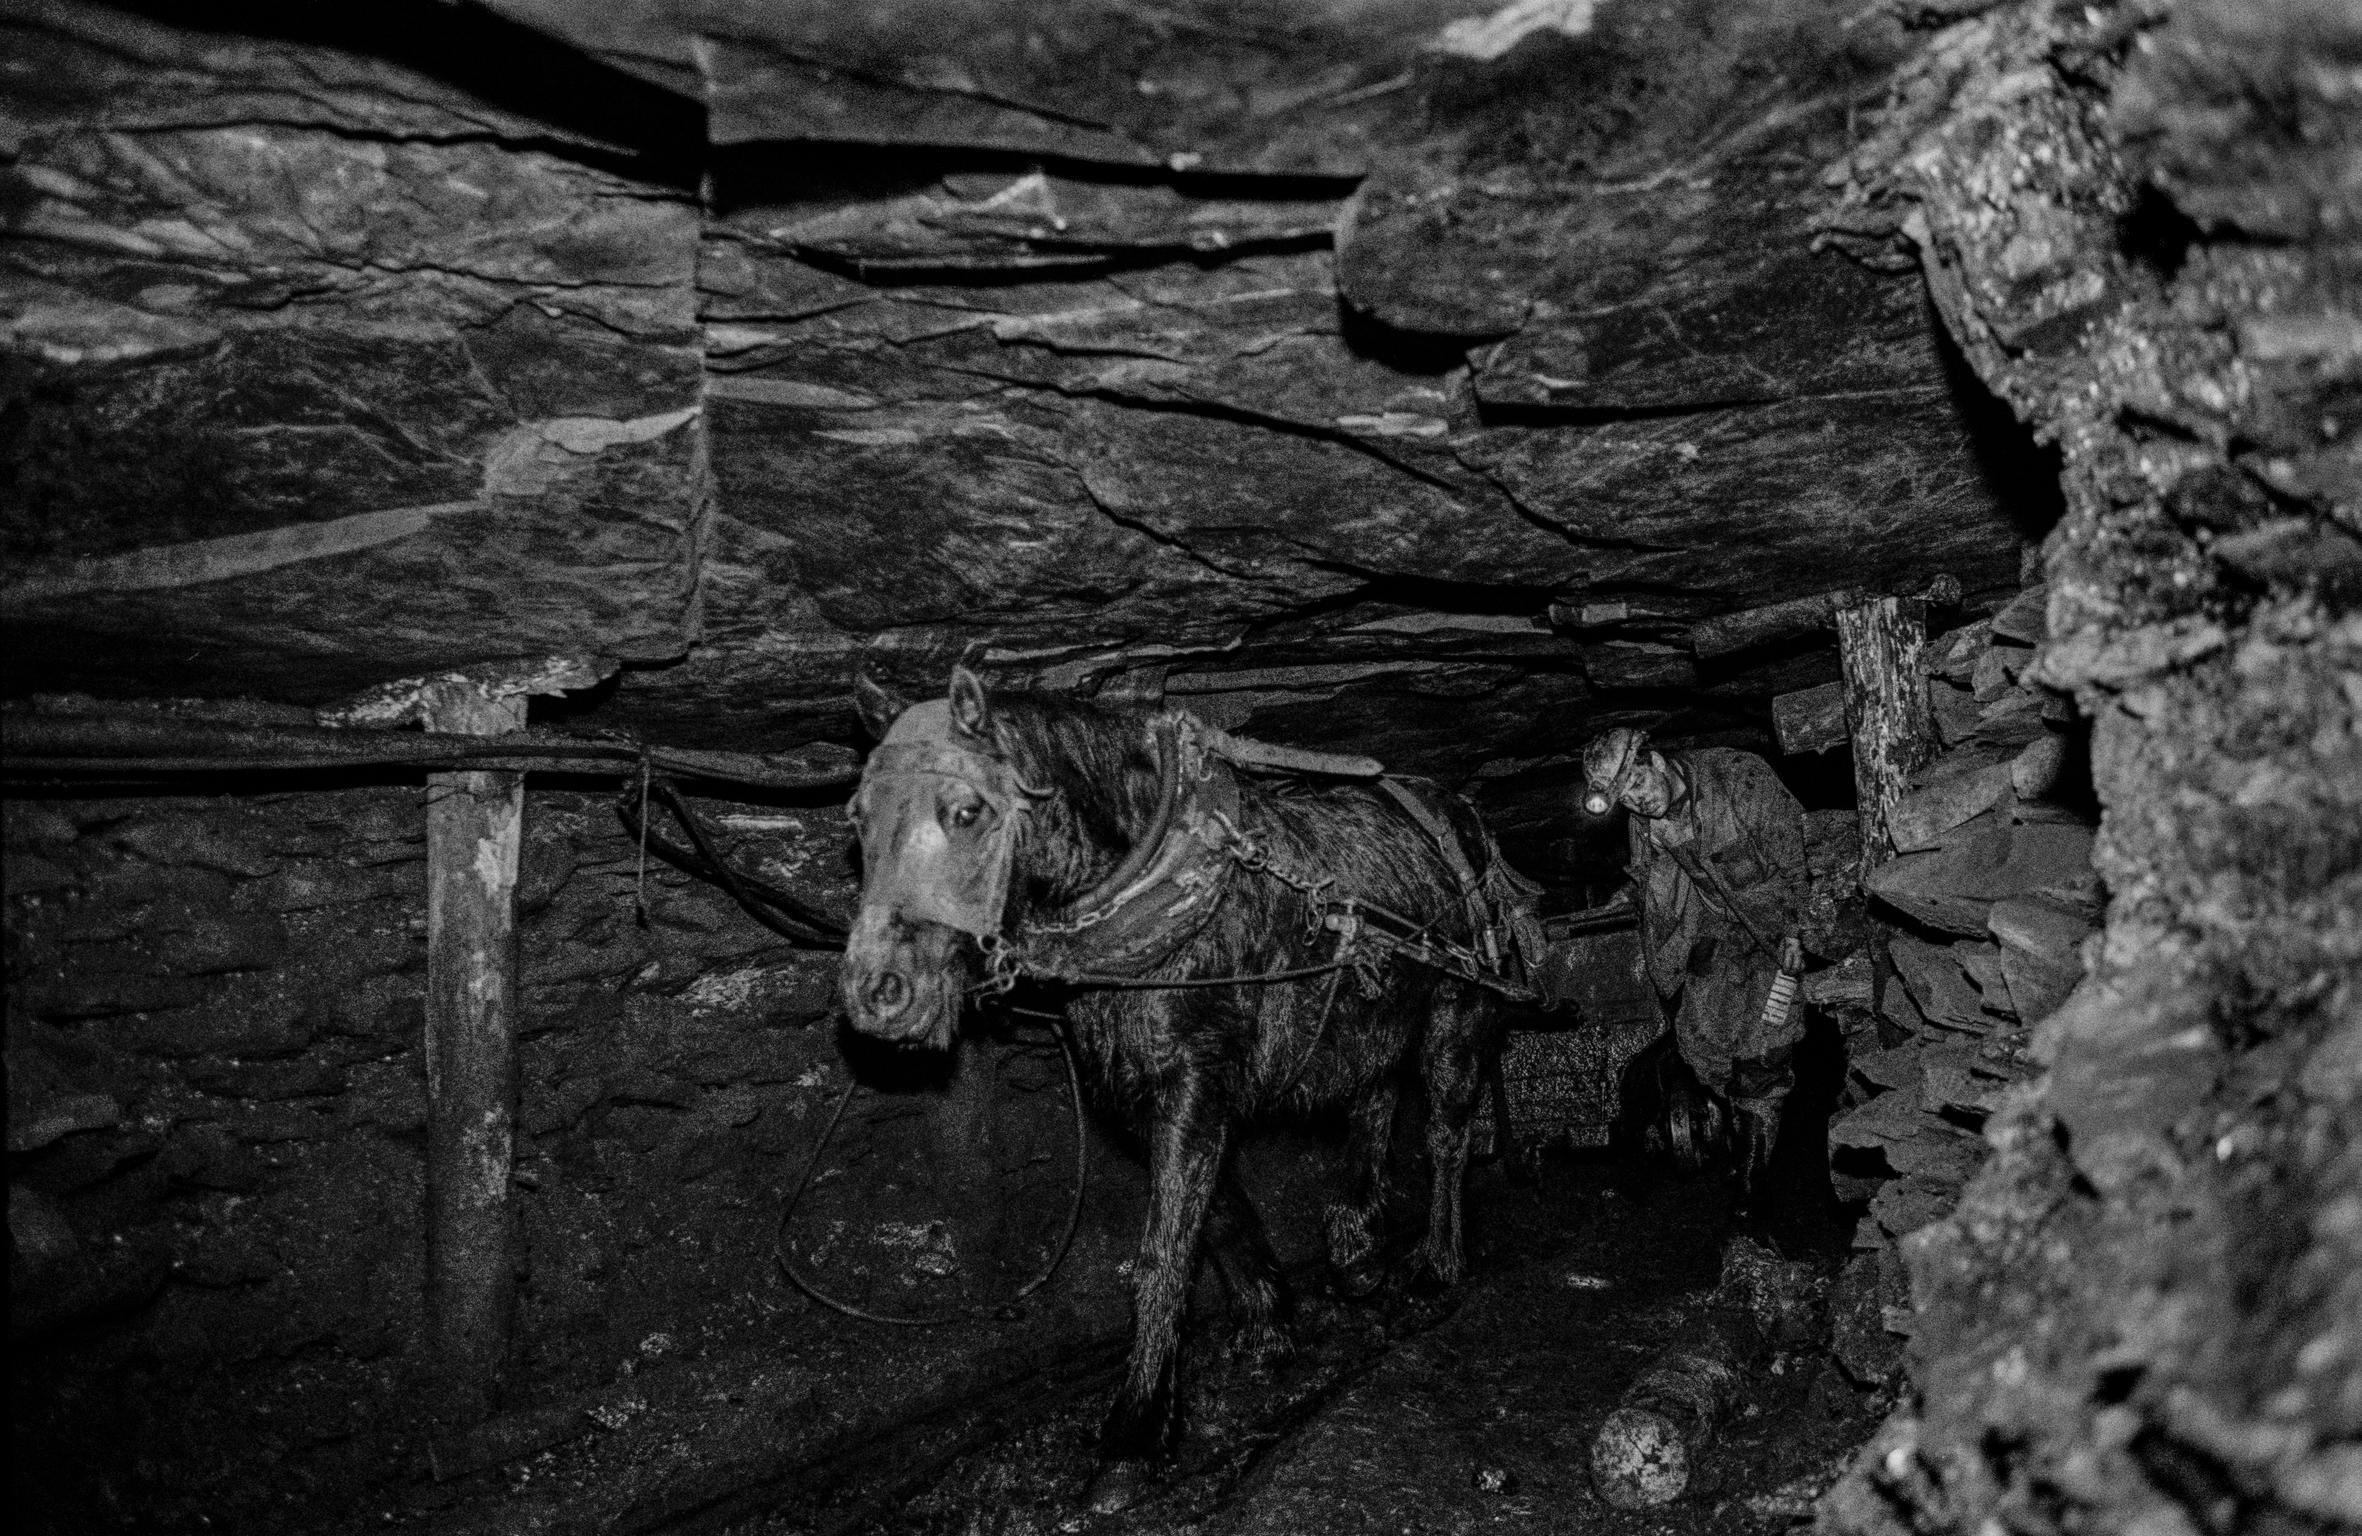 Black Mountain coal. Pit ponies each have an individual handler who is responsible for its health, welfare and cleanliness. Neath, Wales